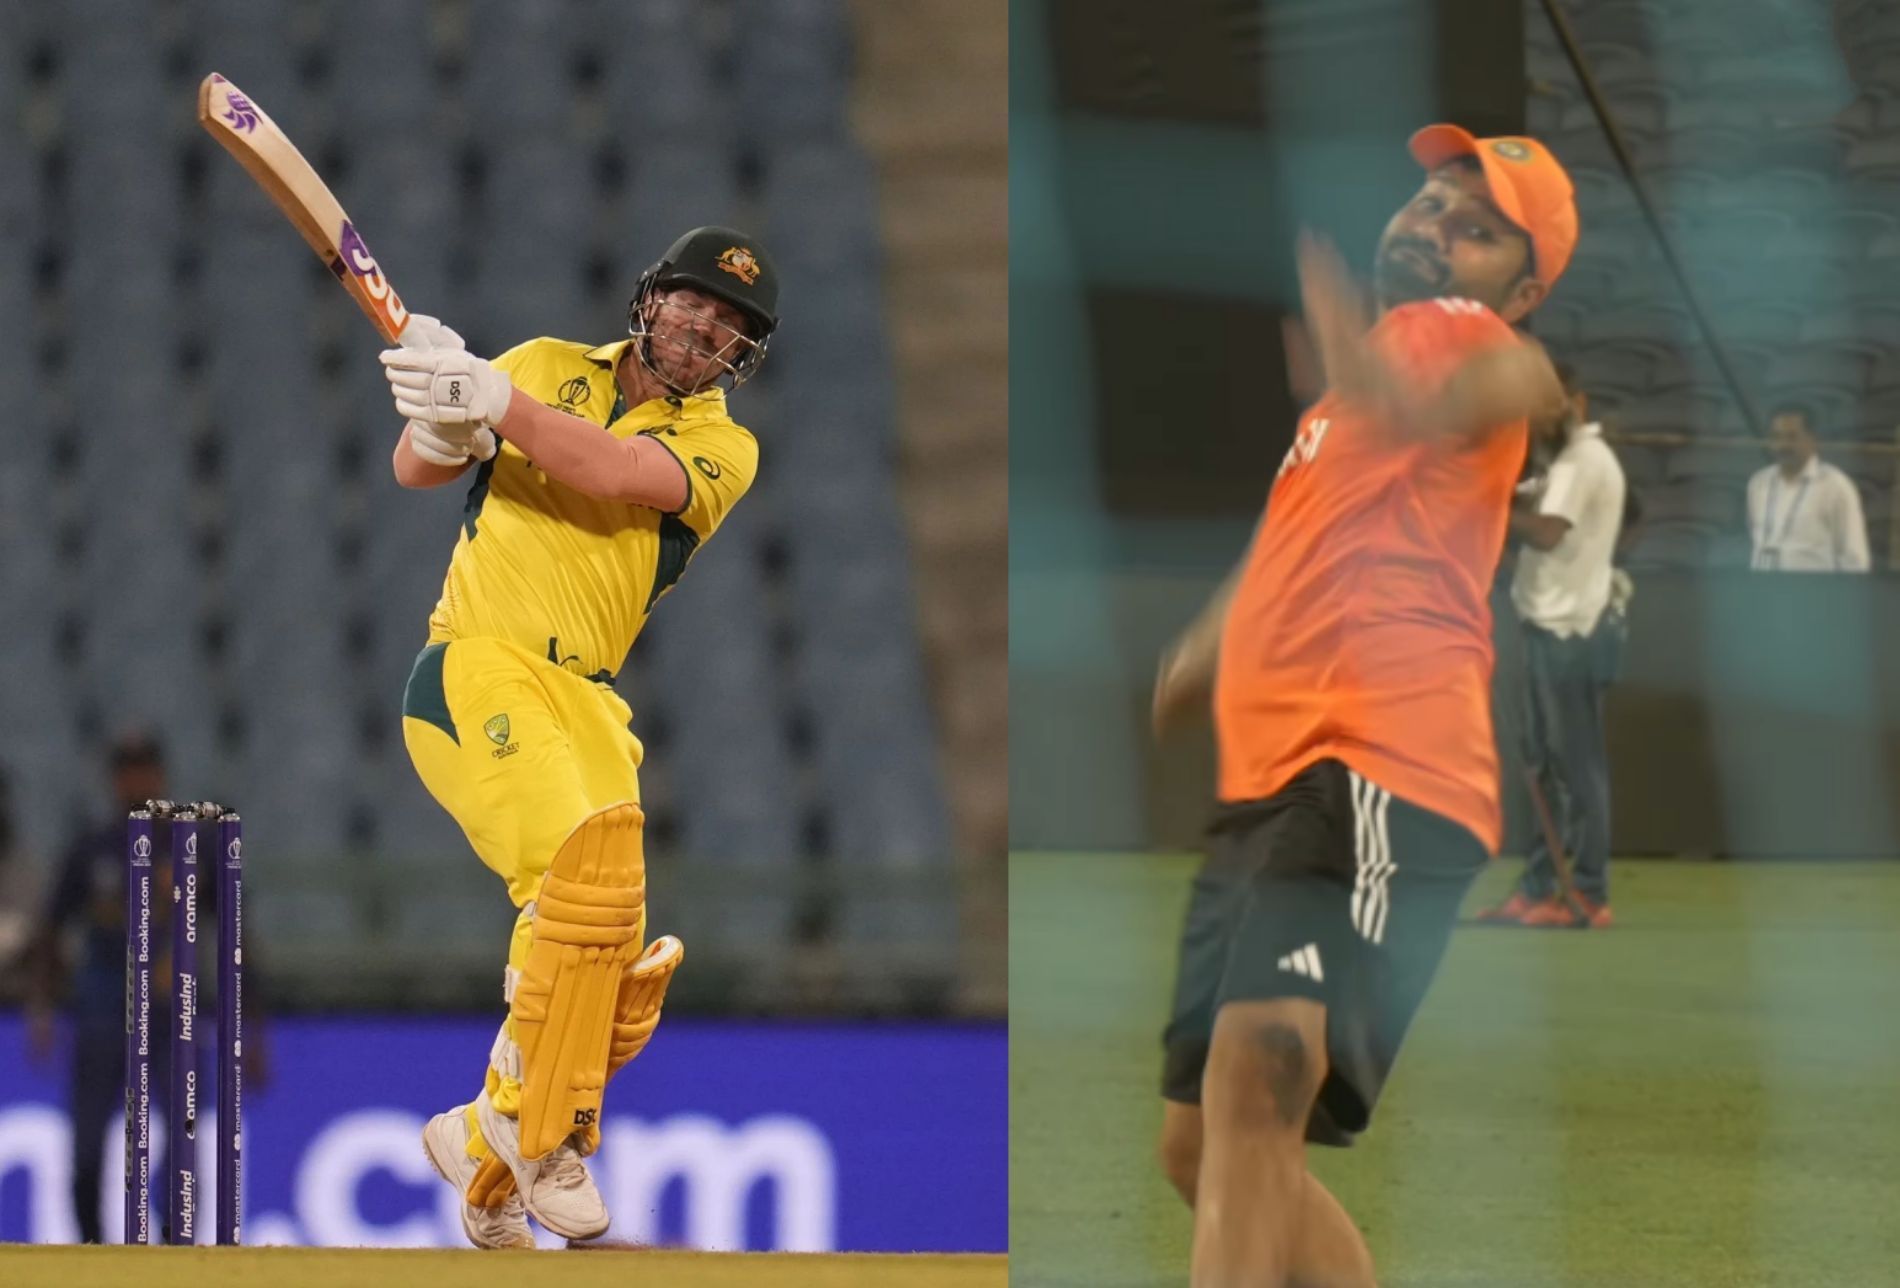 David Warner (left) and (right) Rohit Sharma bowling in the nets. (Pics: AP &amp; BCCI)